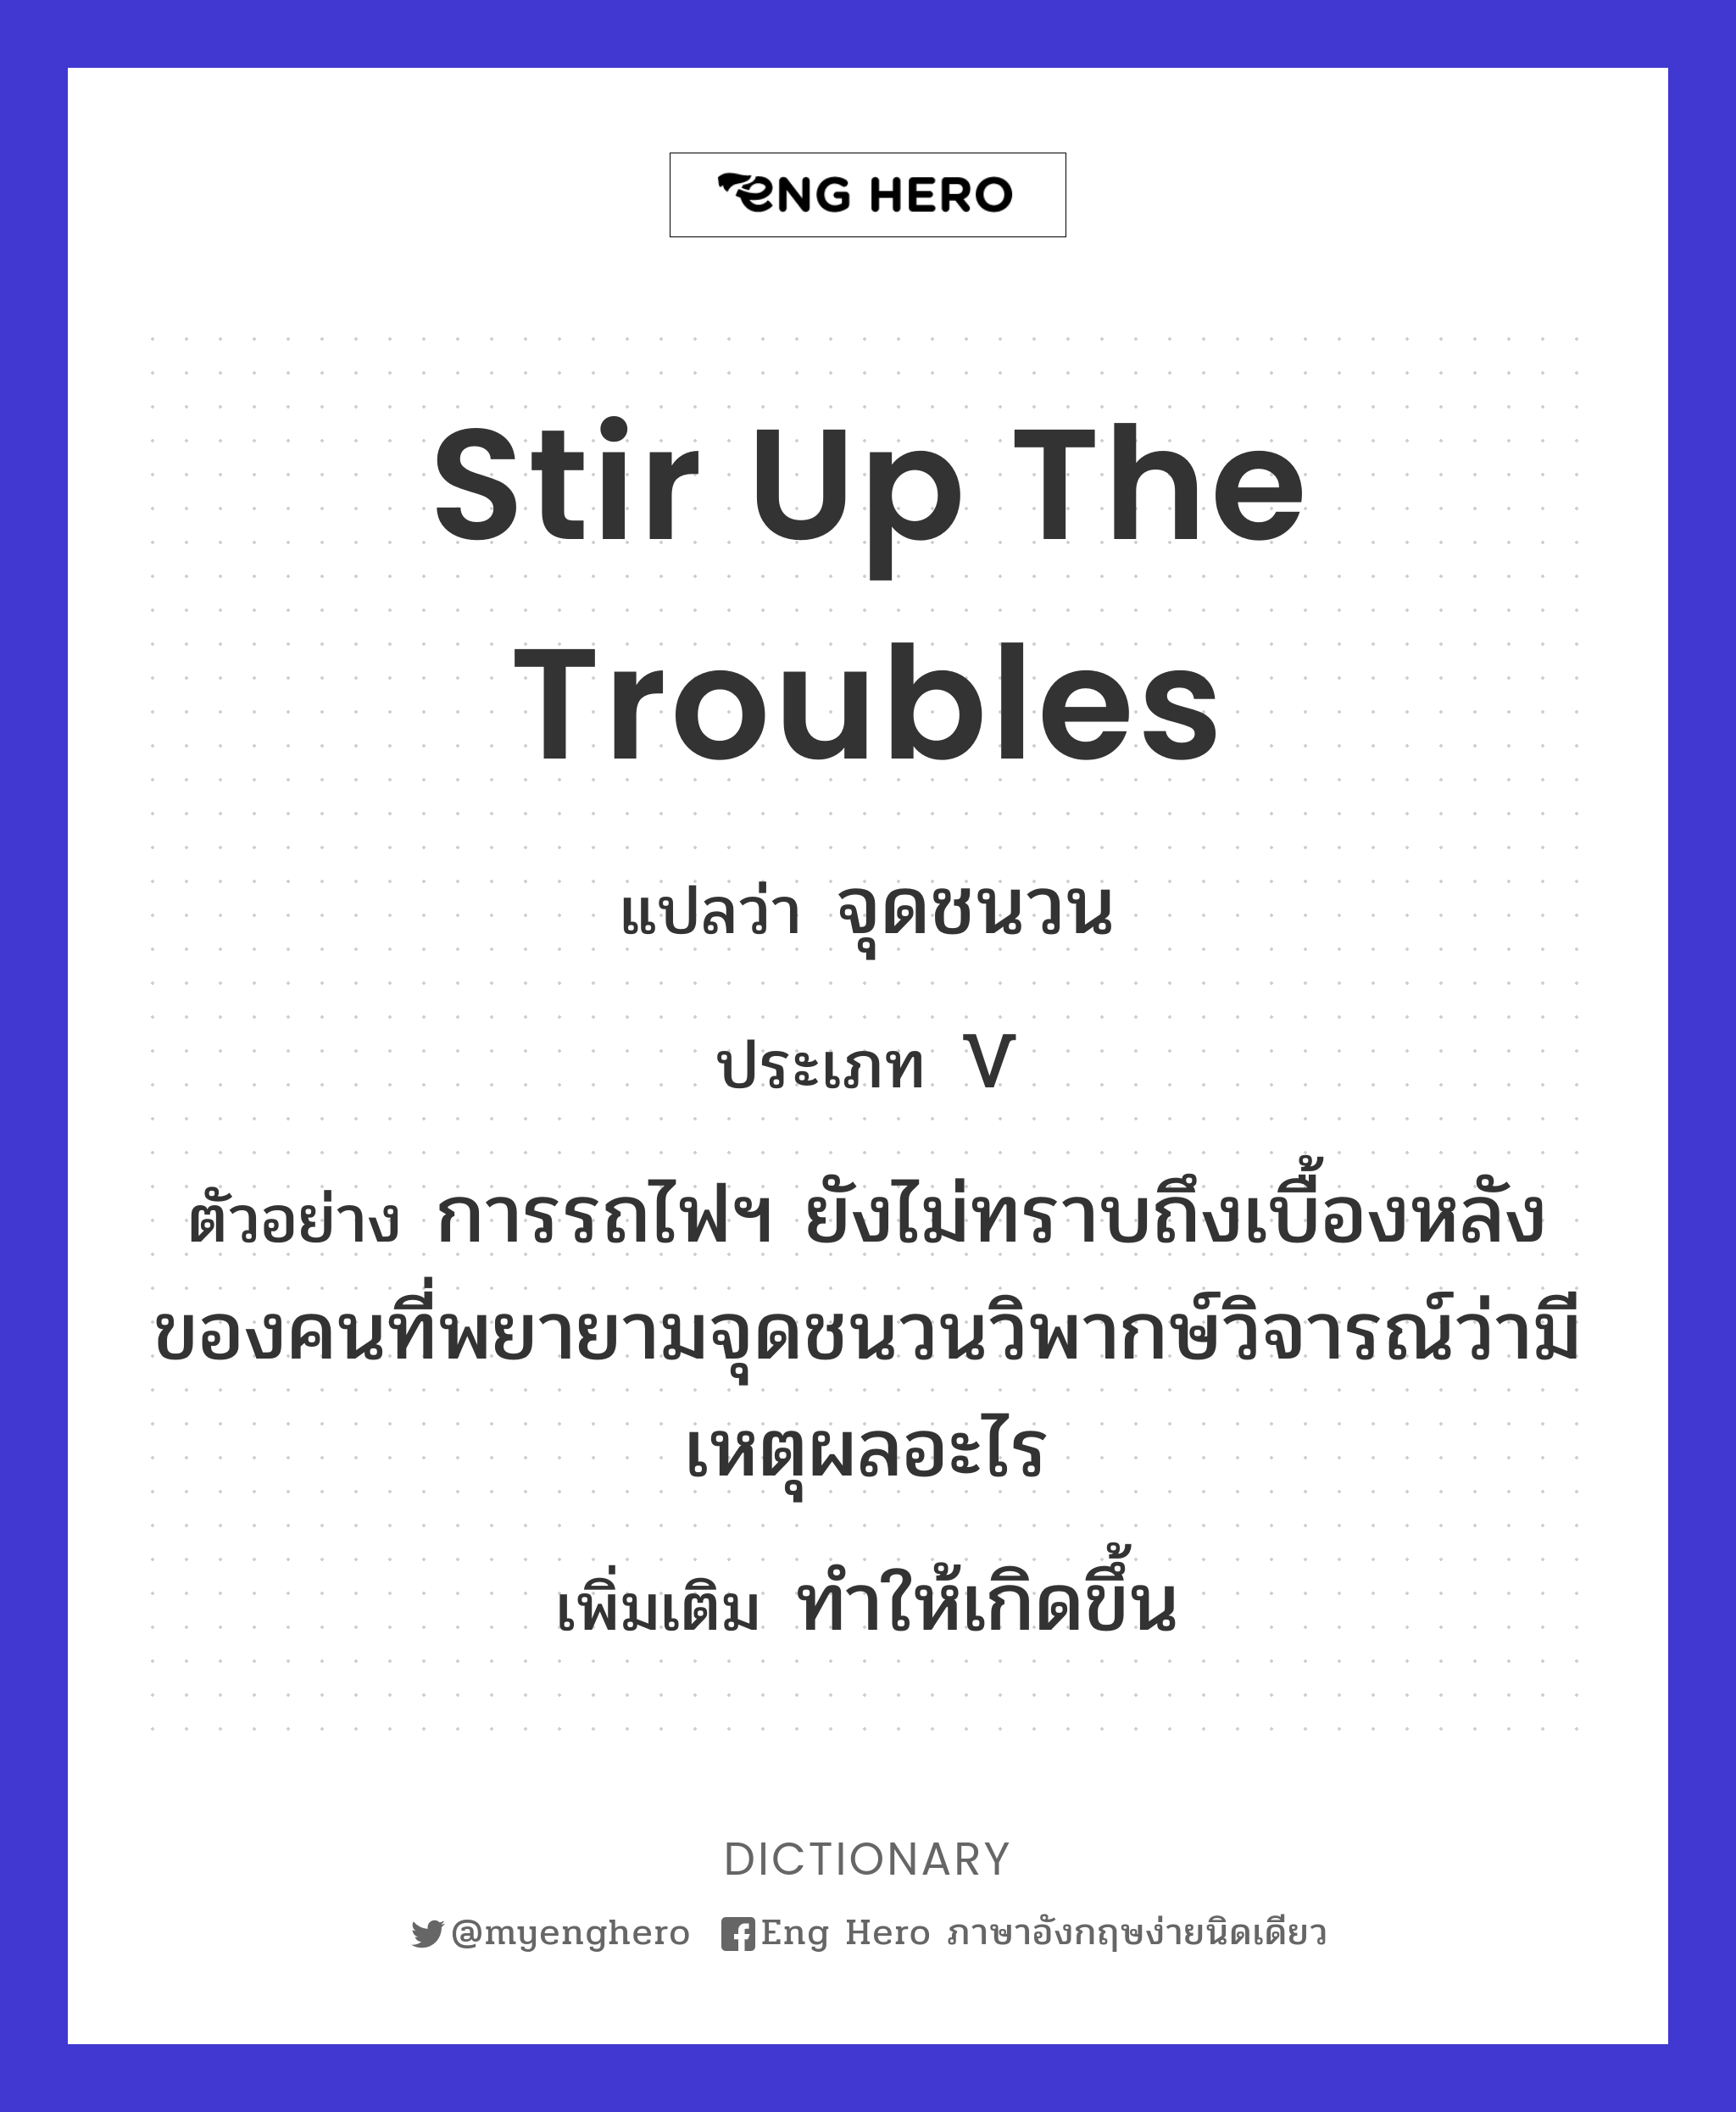 stir up the troubles